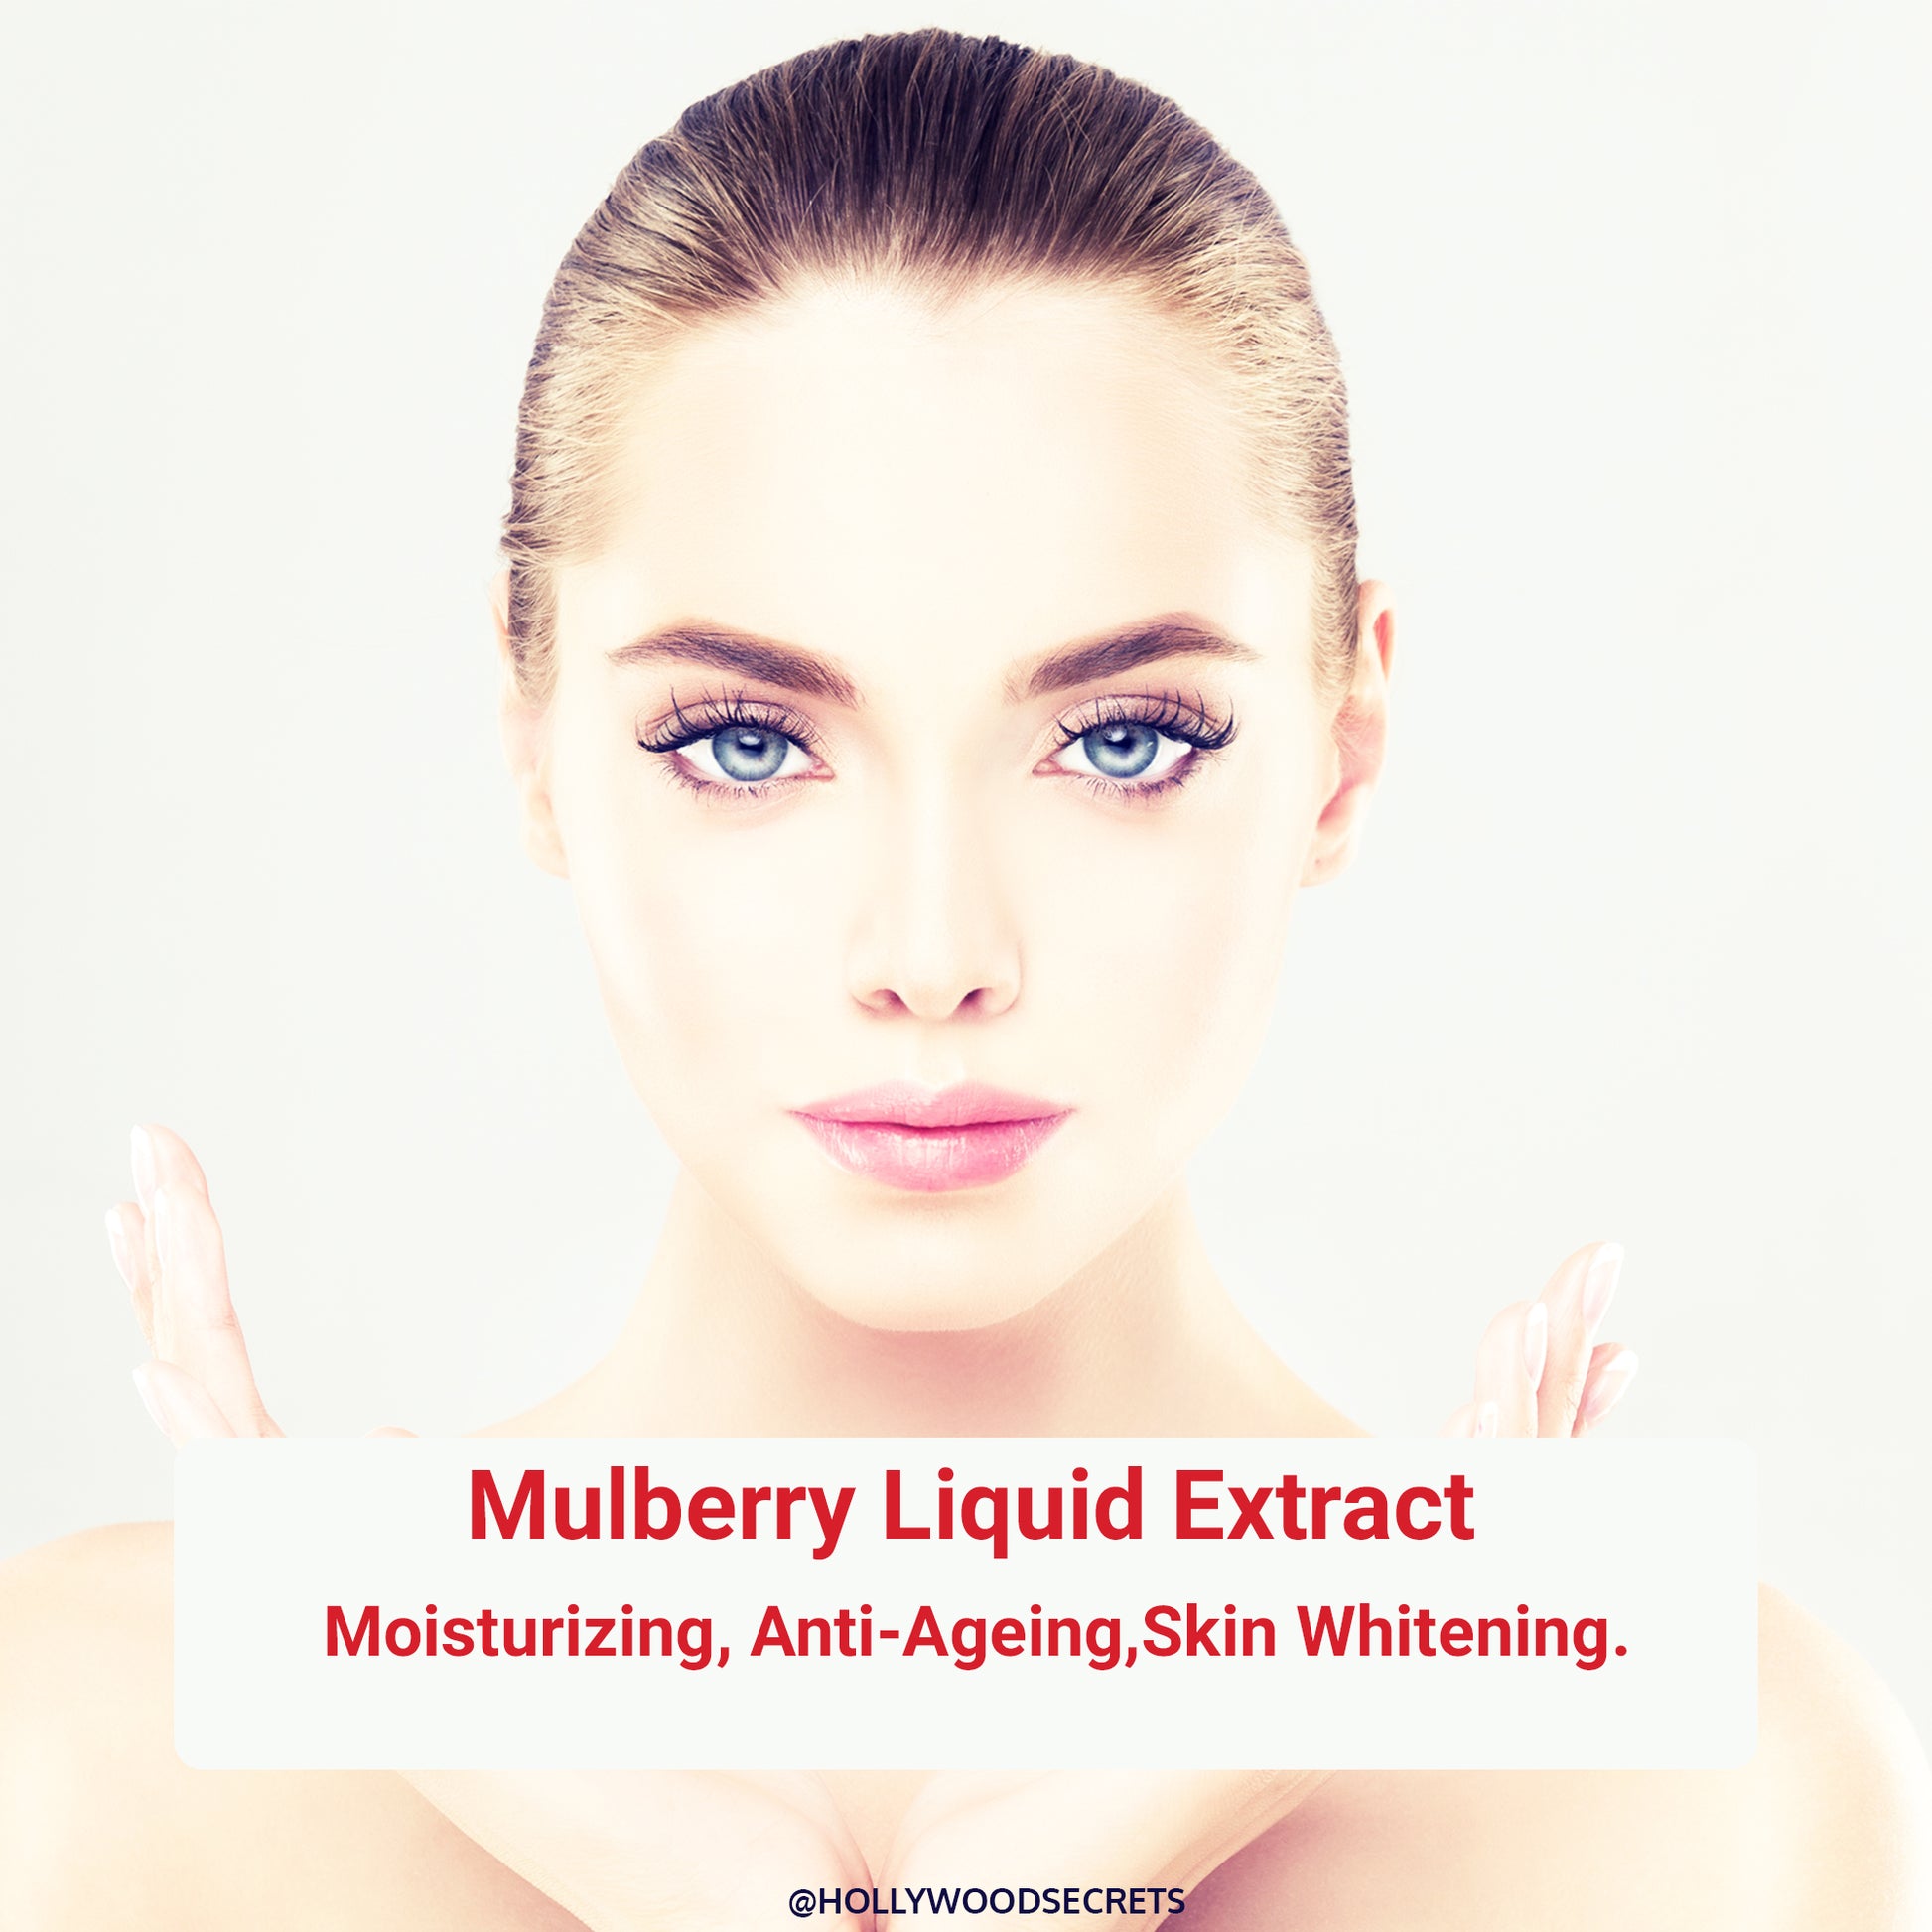 Pure 85% Mulberry Liquid Extract 100ml Hollywood Secrets